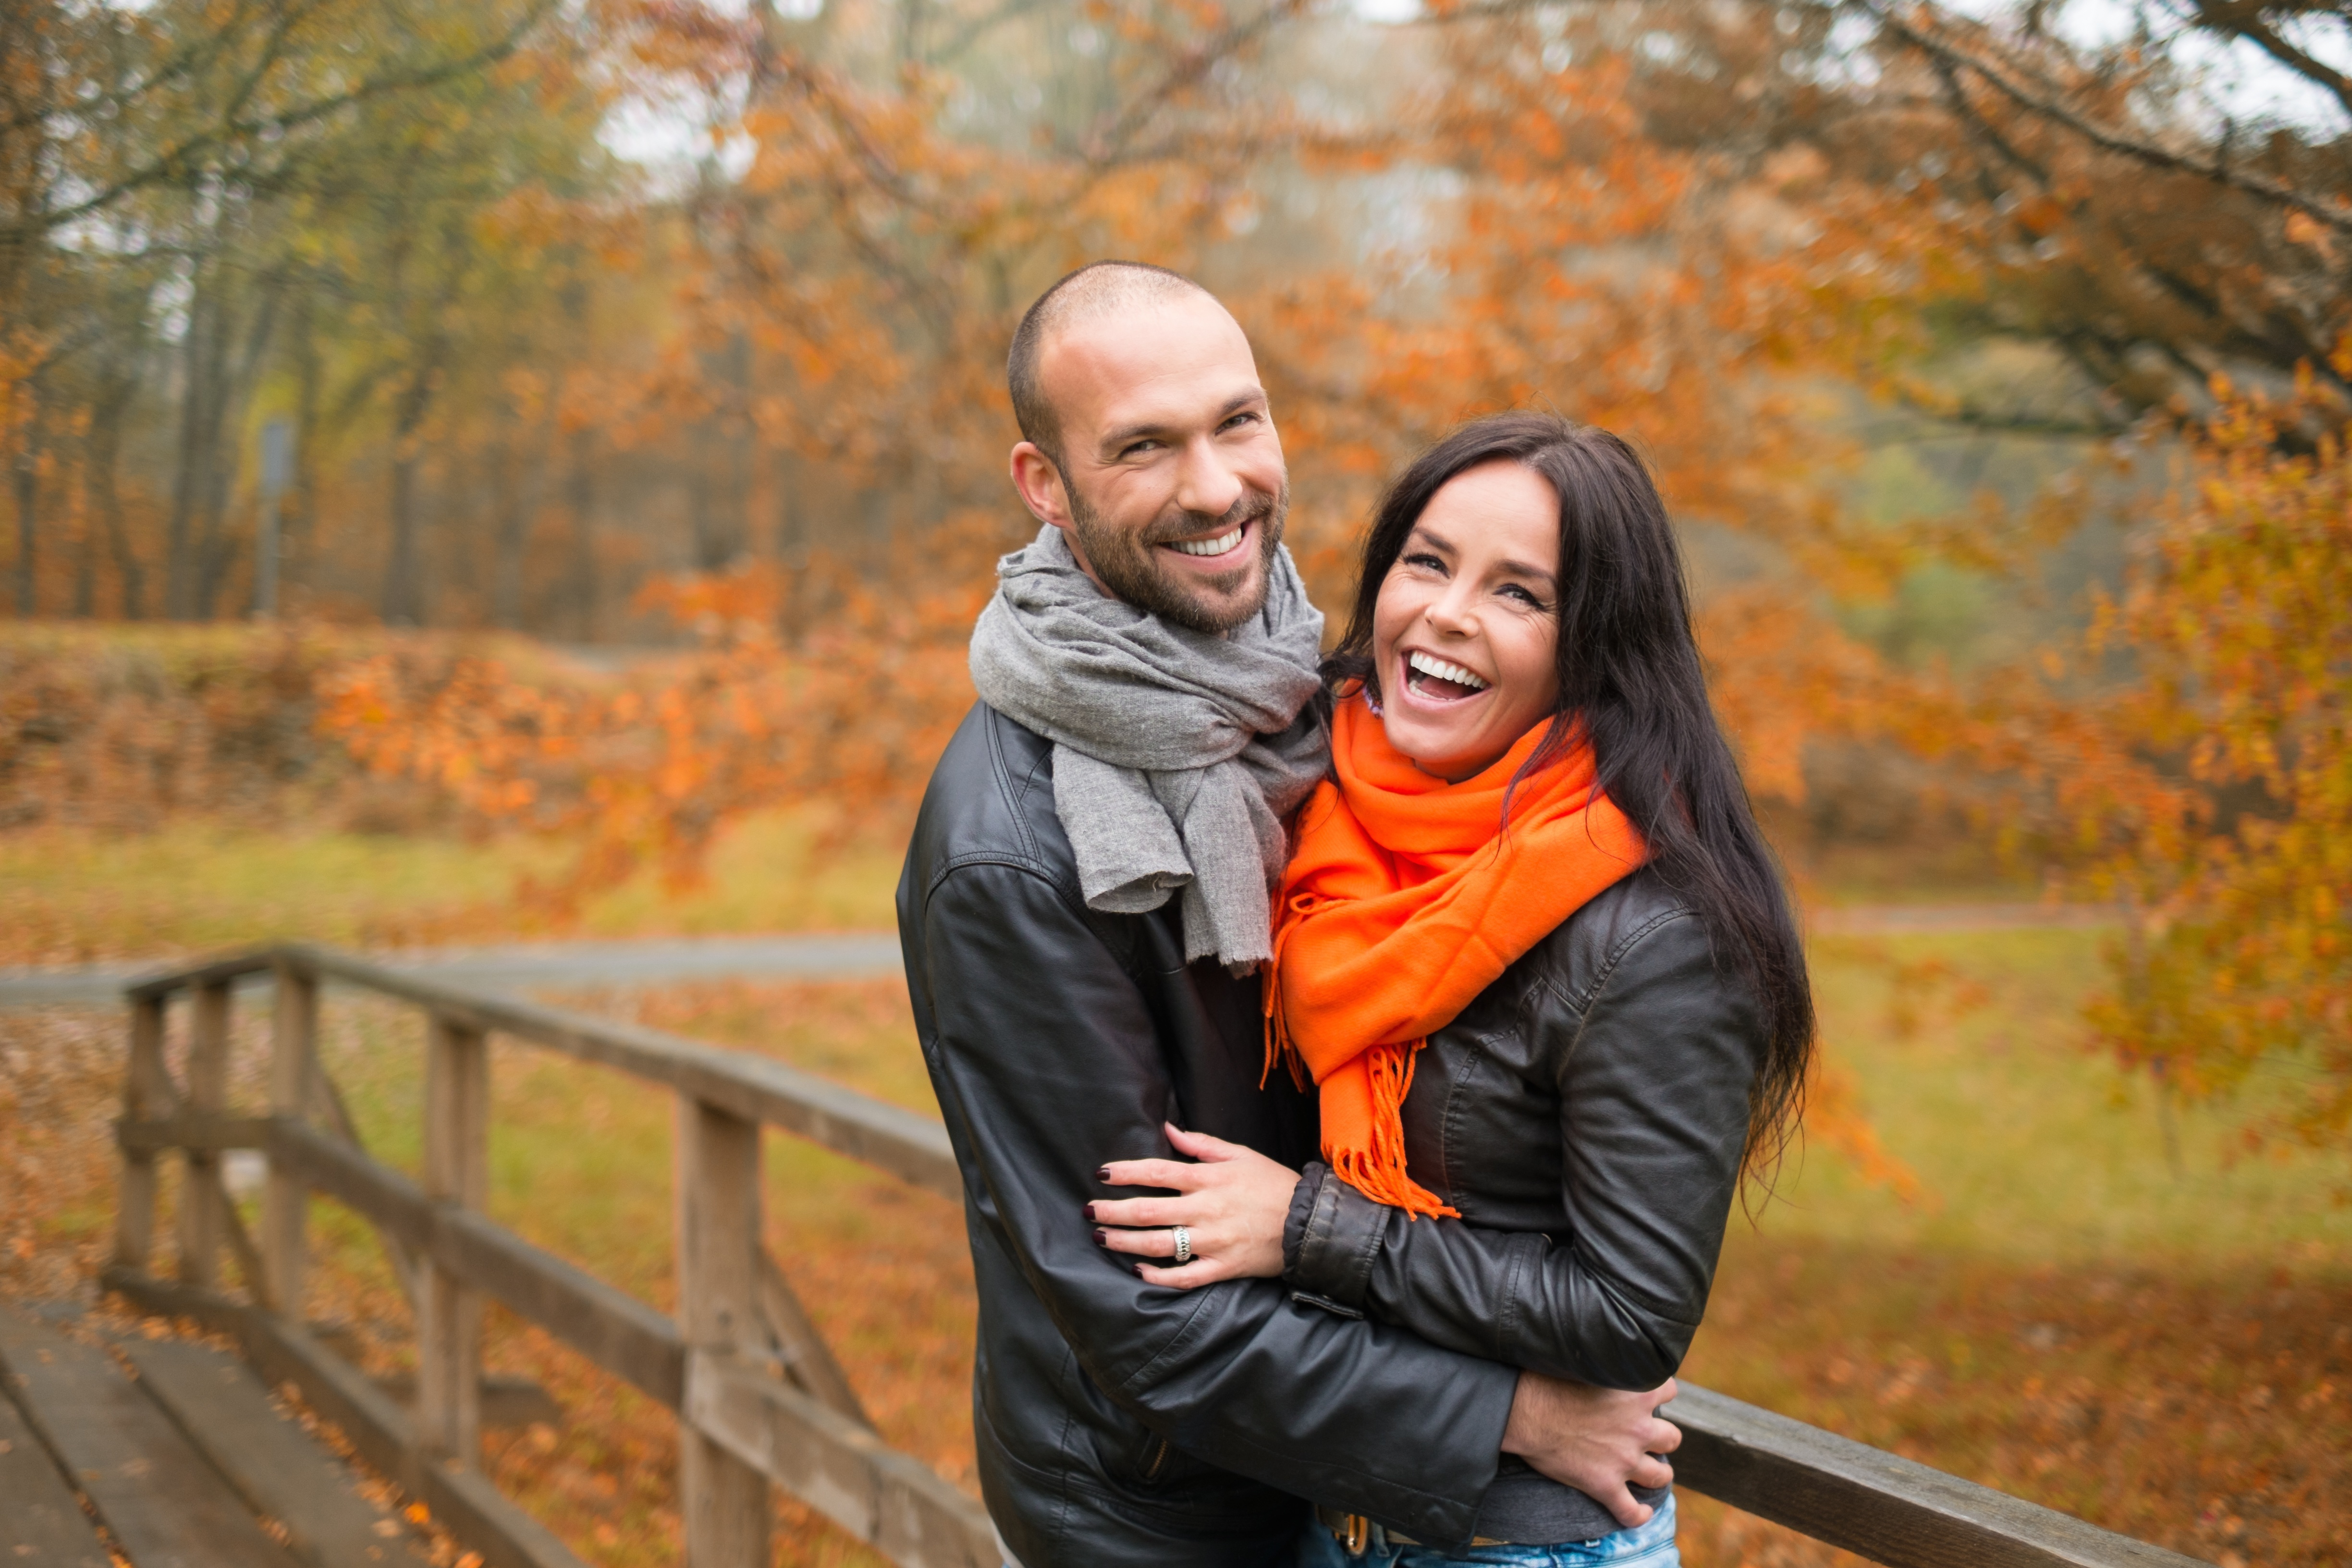 A happy middle-aged couple | Source: Shutterstock